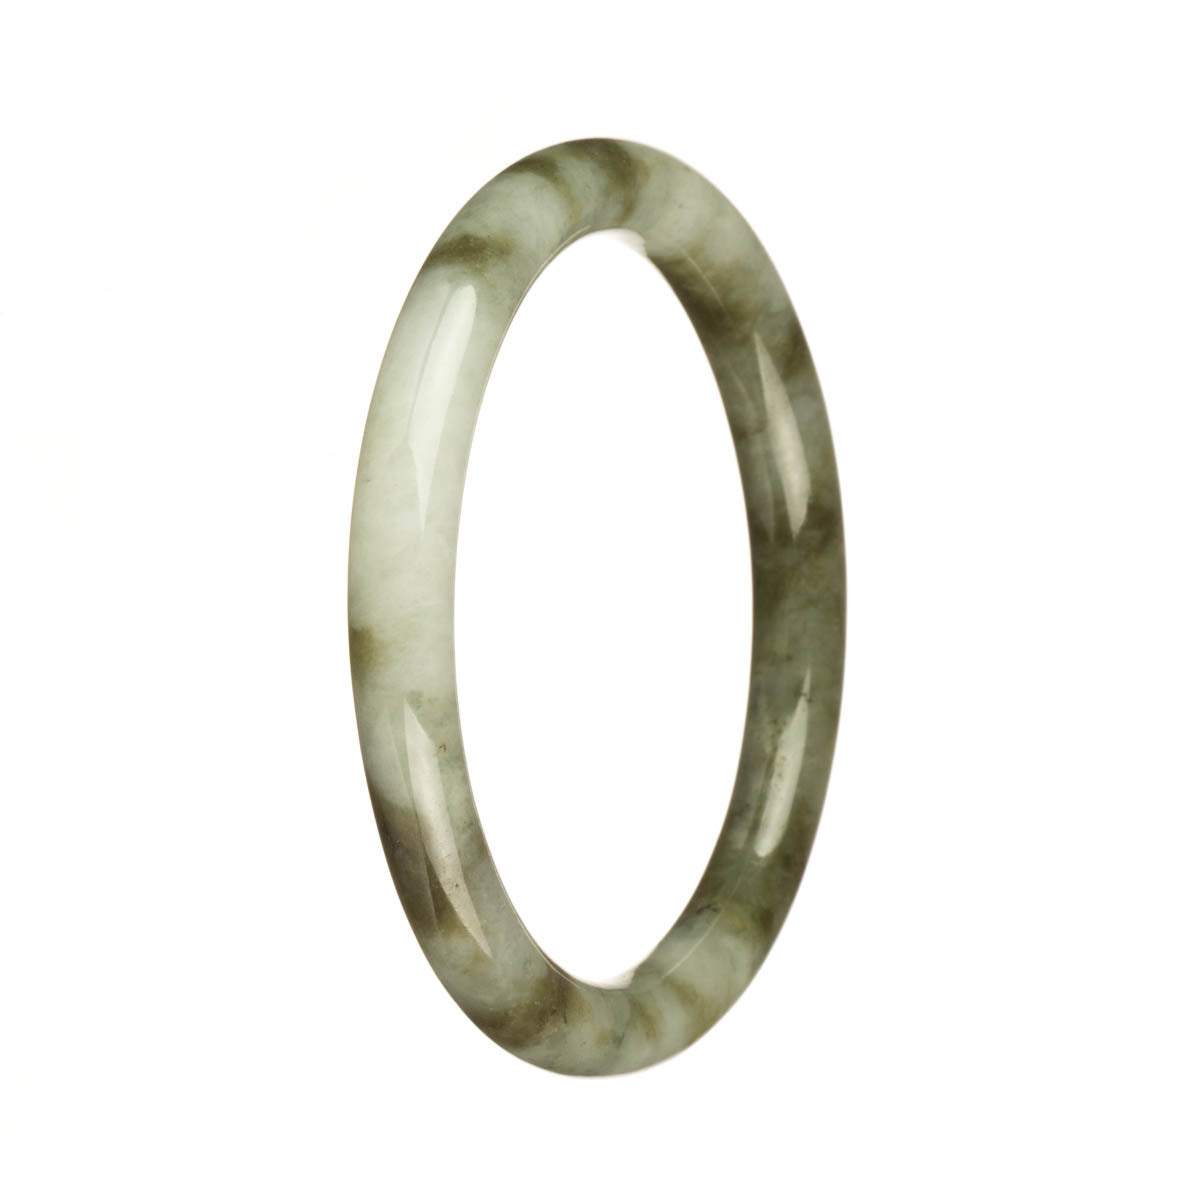 A beautiful petite round Burma jade bracelet with a genuine natural white color and olive green pattern. Perfect for adding a touch of elegance to any outfit.